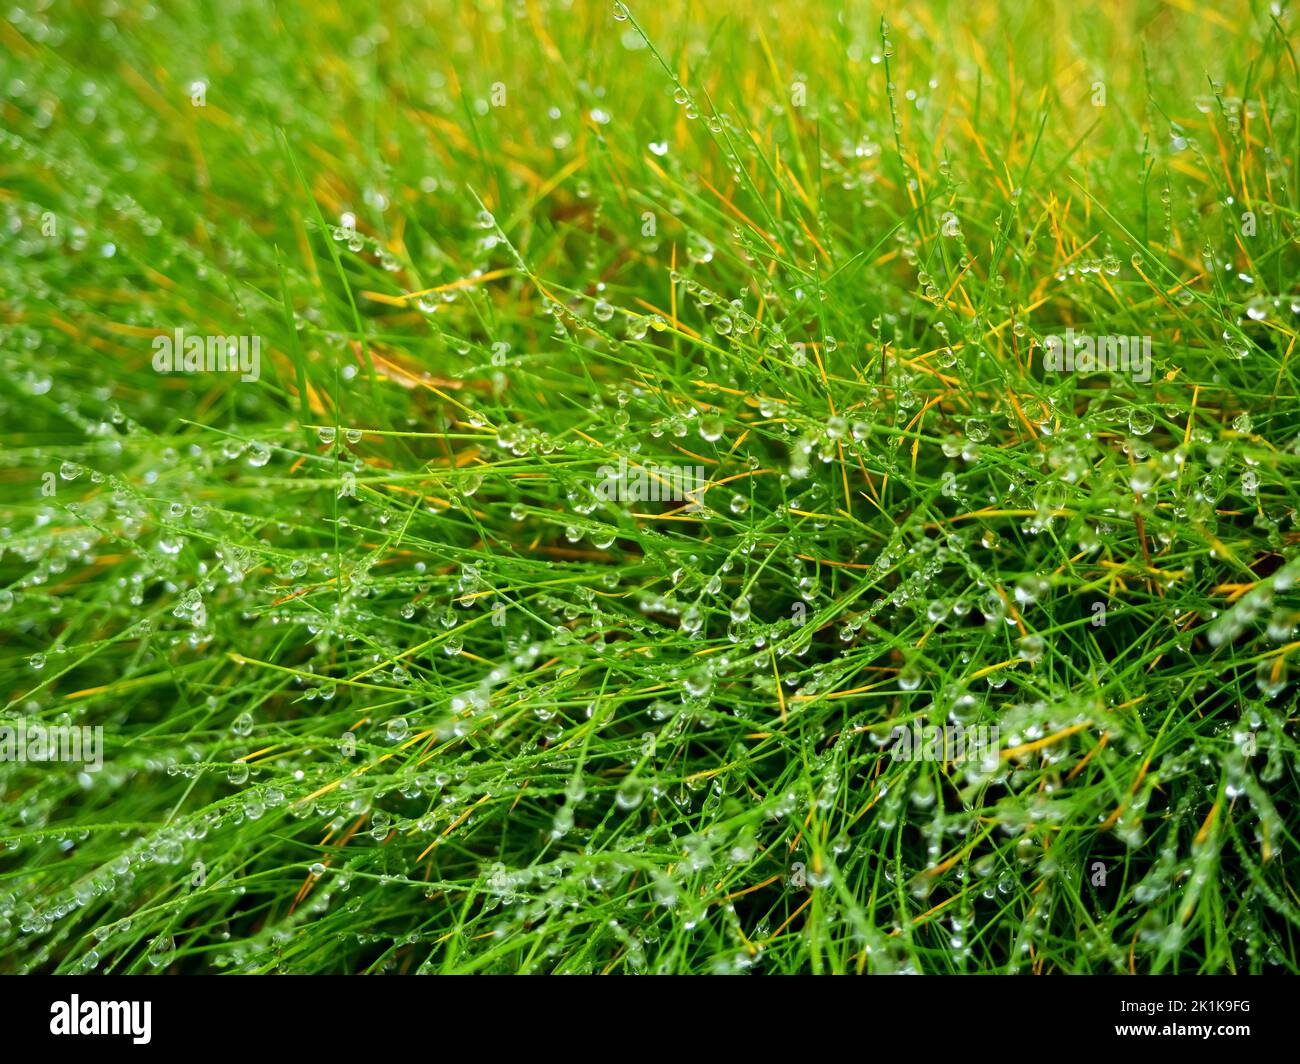 wet fresh green grass covered with water drops or dew, close up photo Stock Photo